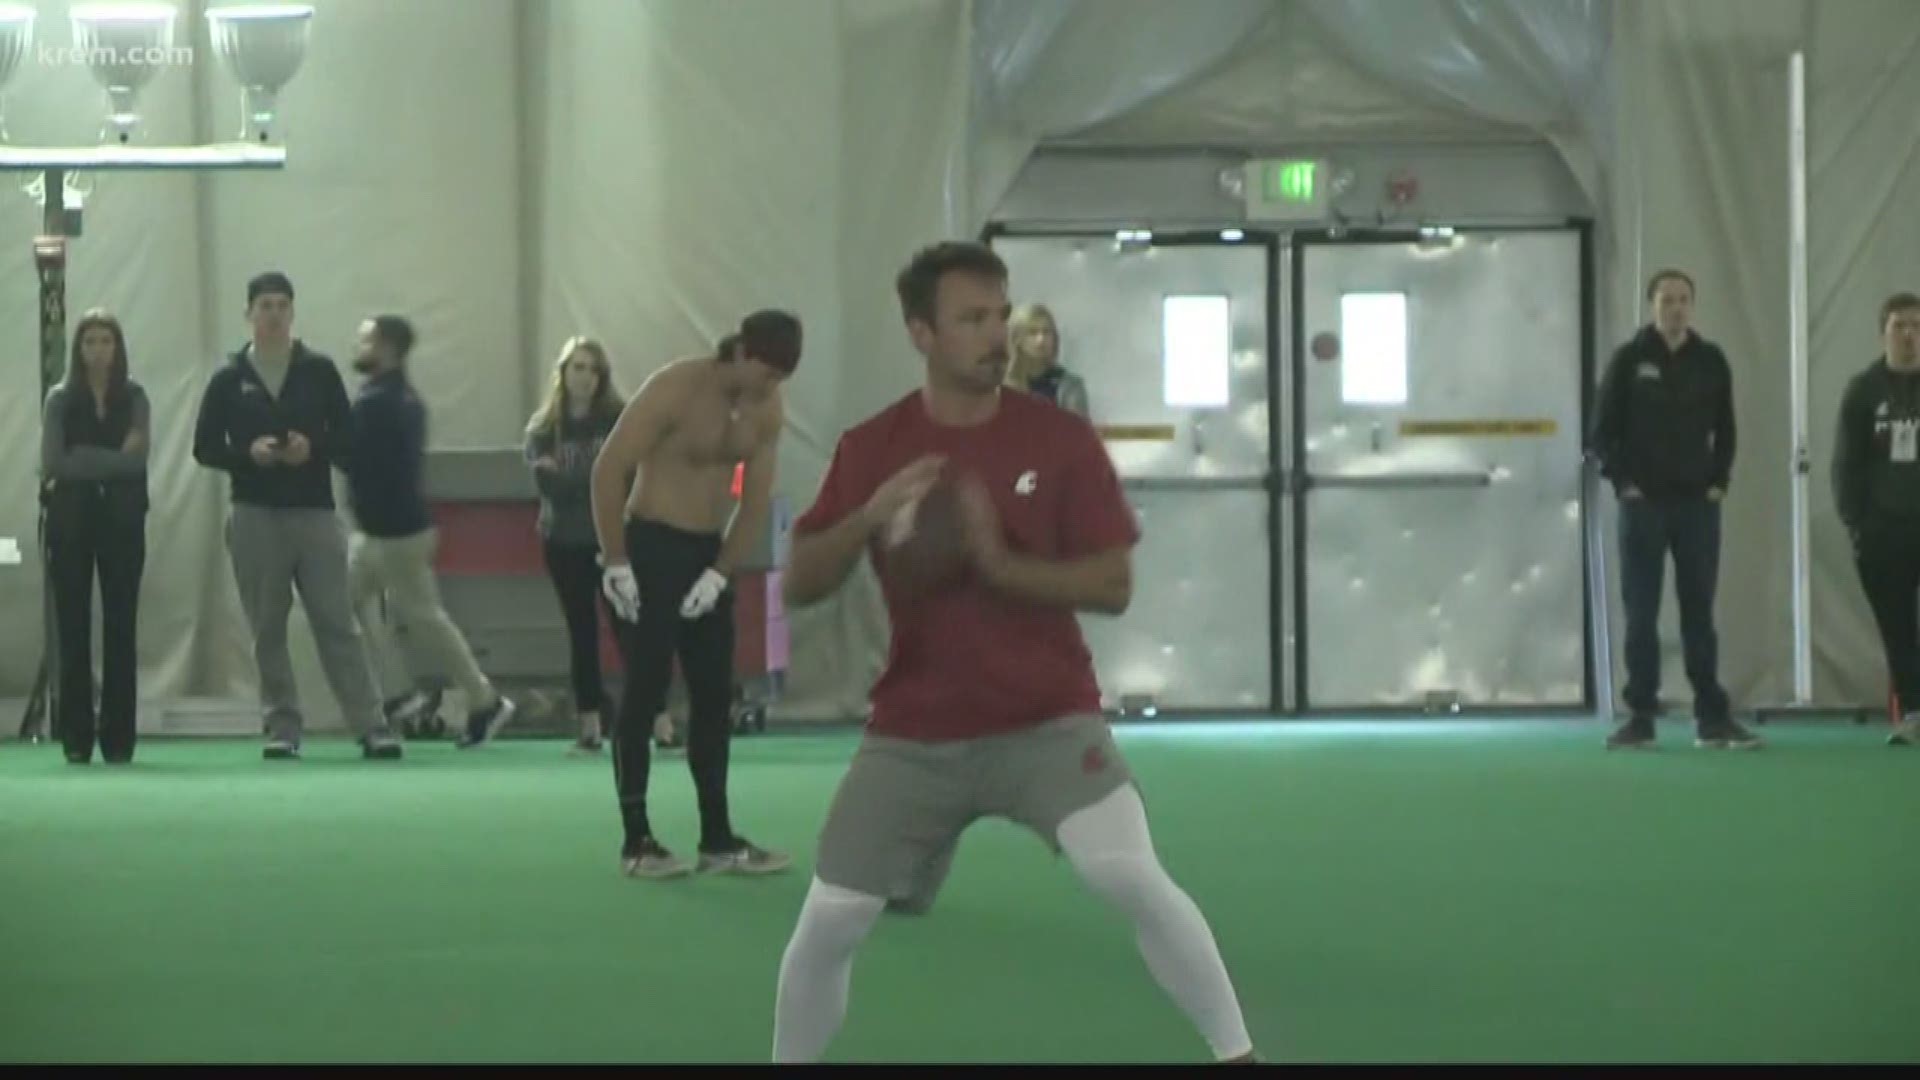 WSU held their annual NFL Pro Day on Wednesday in Pullman, with three players taking center stage: Andre Dillard, Gardner Minshew, and James Williams.